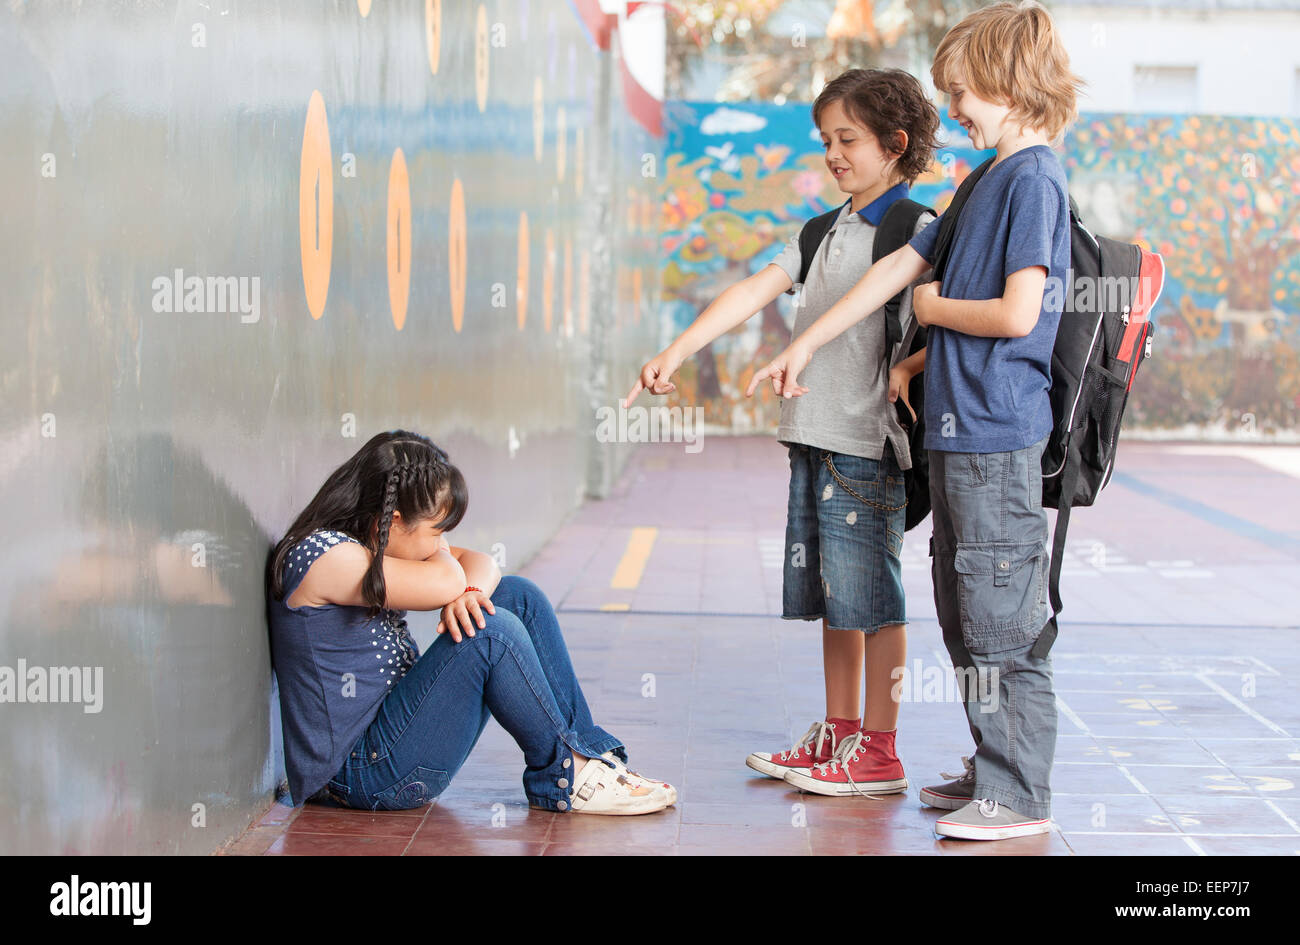 Elementary Age Bullying in Schoolyard. Stock Photo